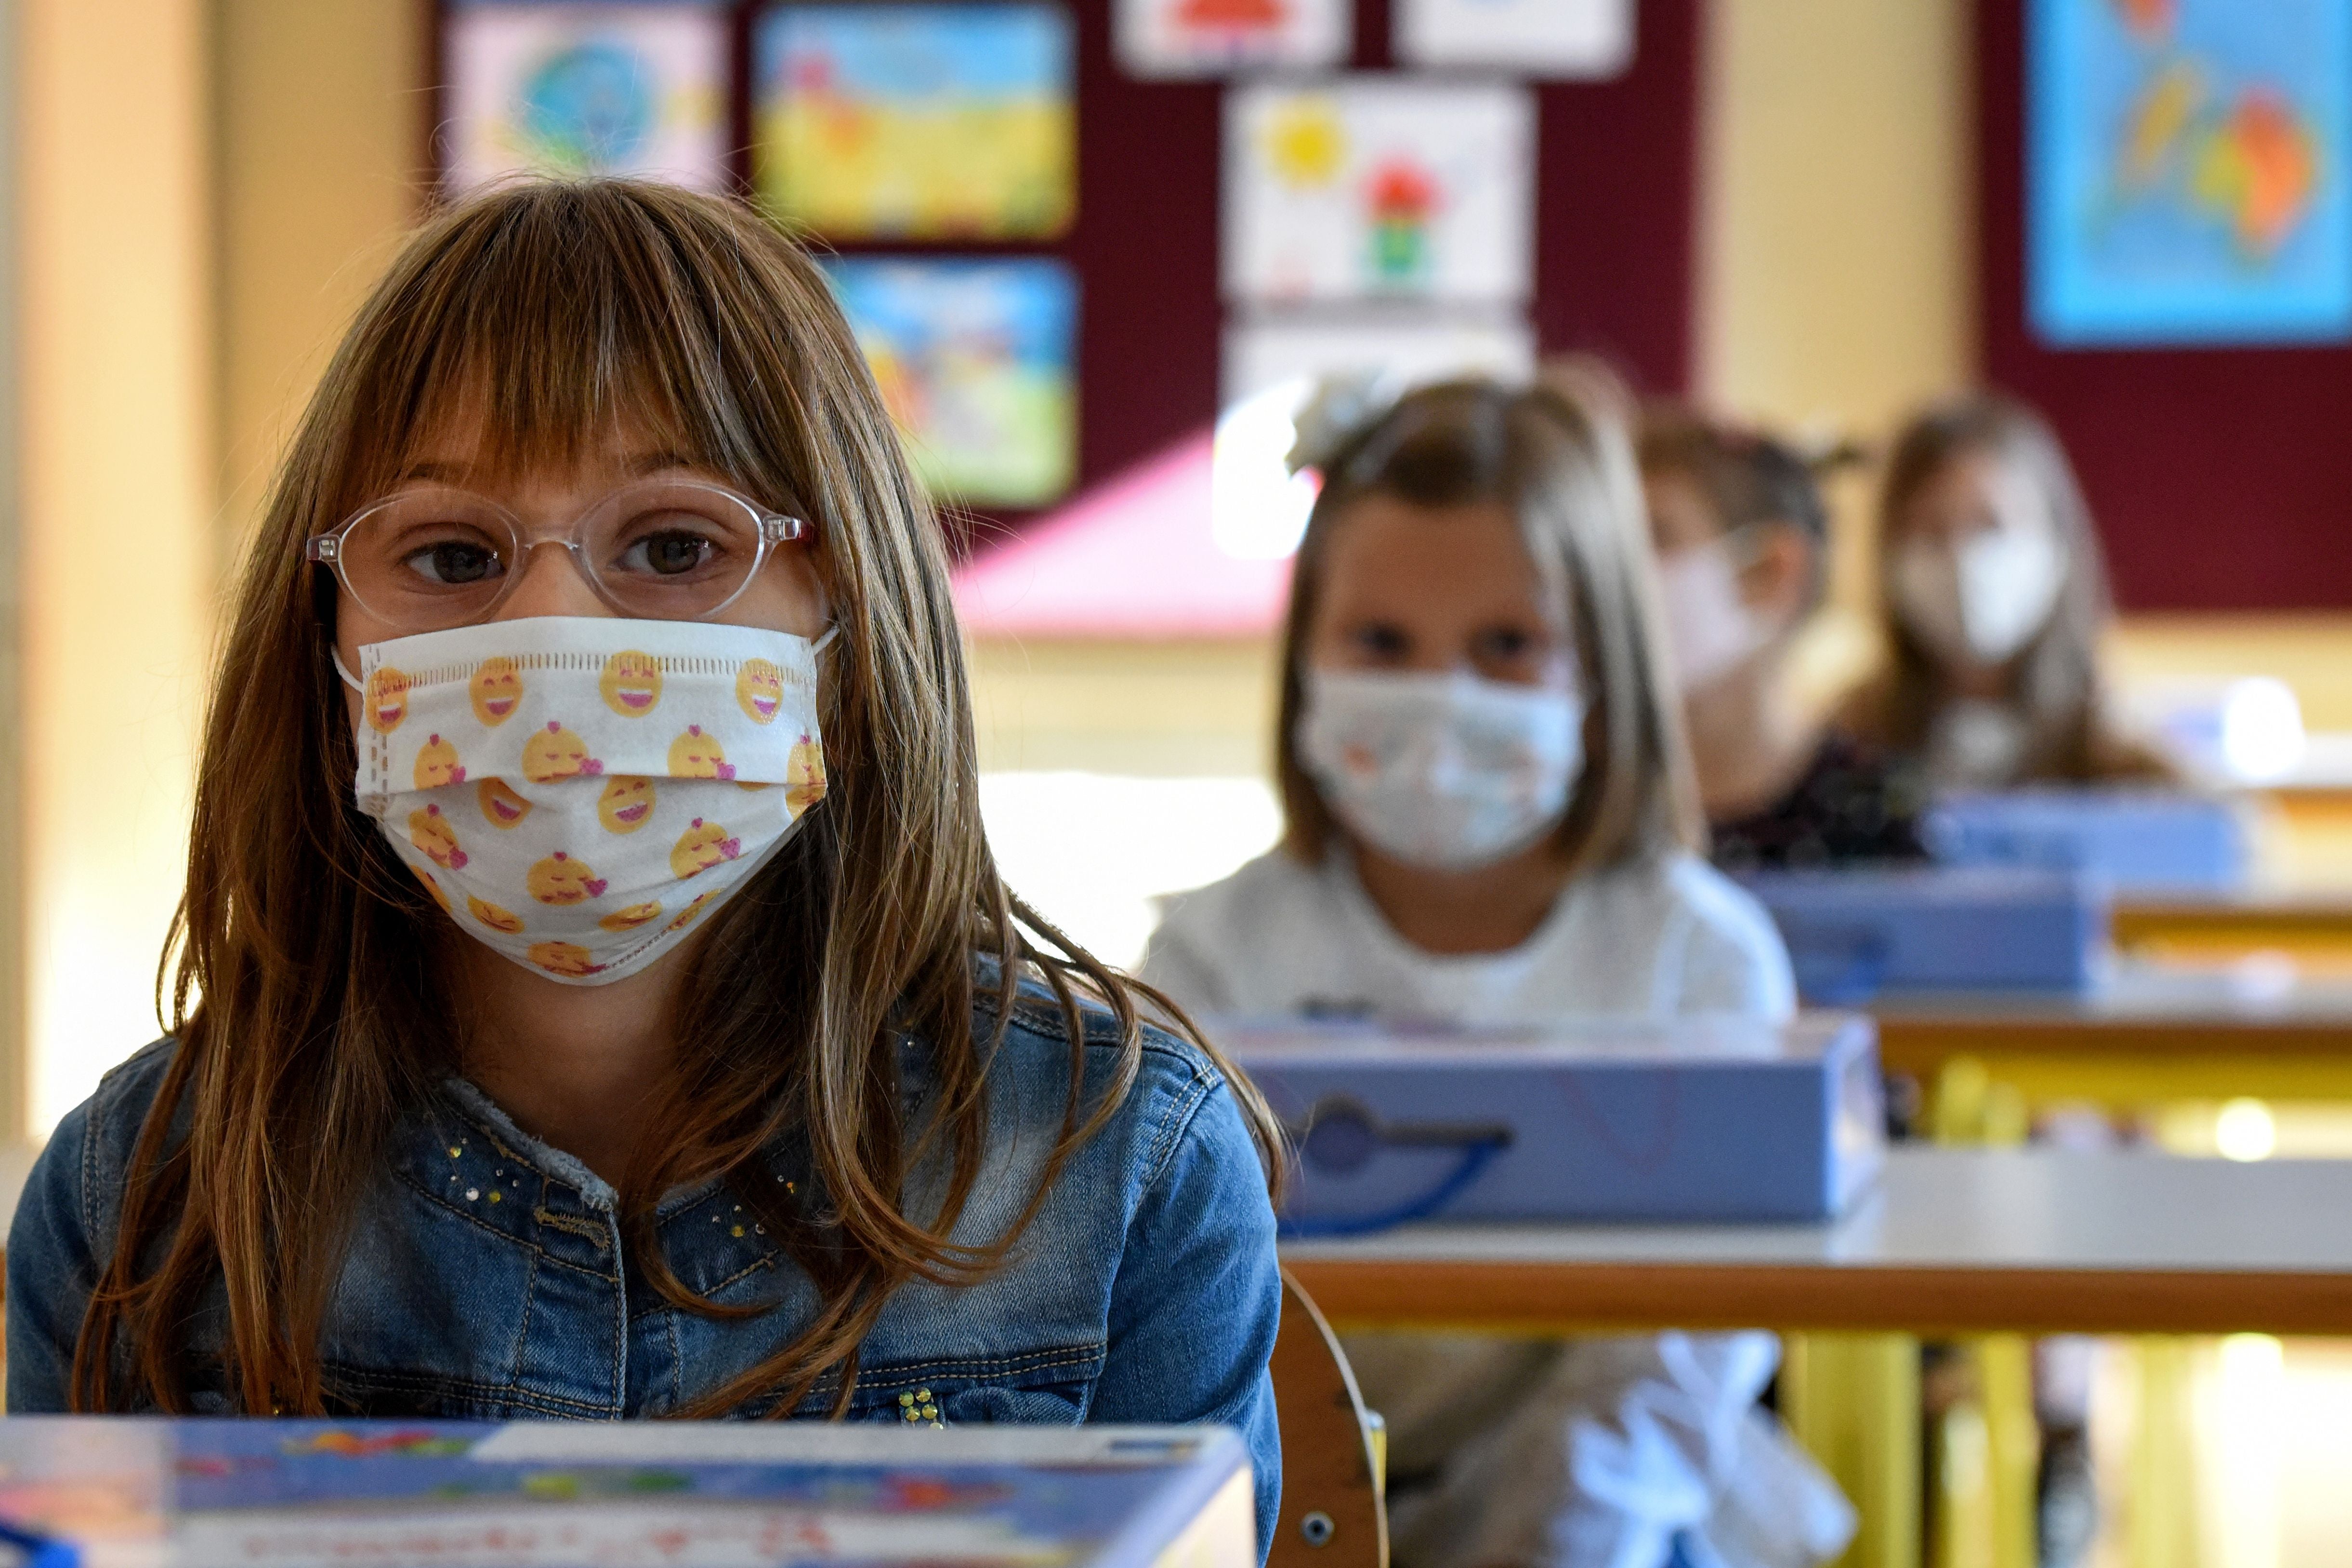 The Centres for Disease Control and Prevention issued guidance on Tuesday urging everyone in school buildings to wear masks